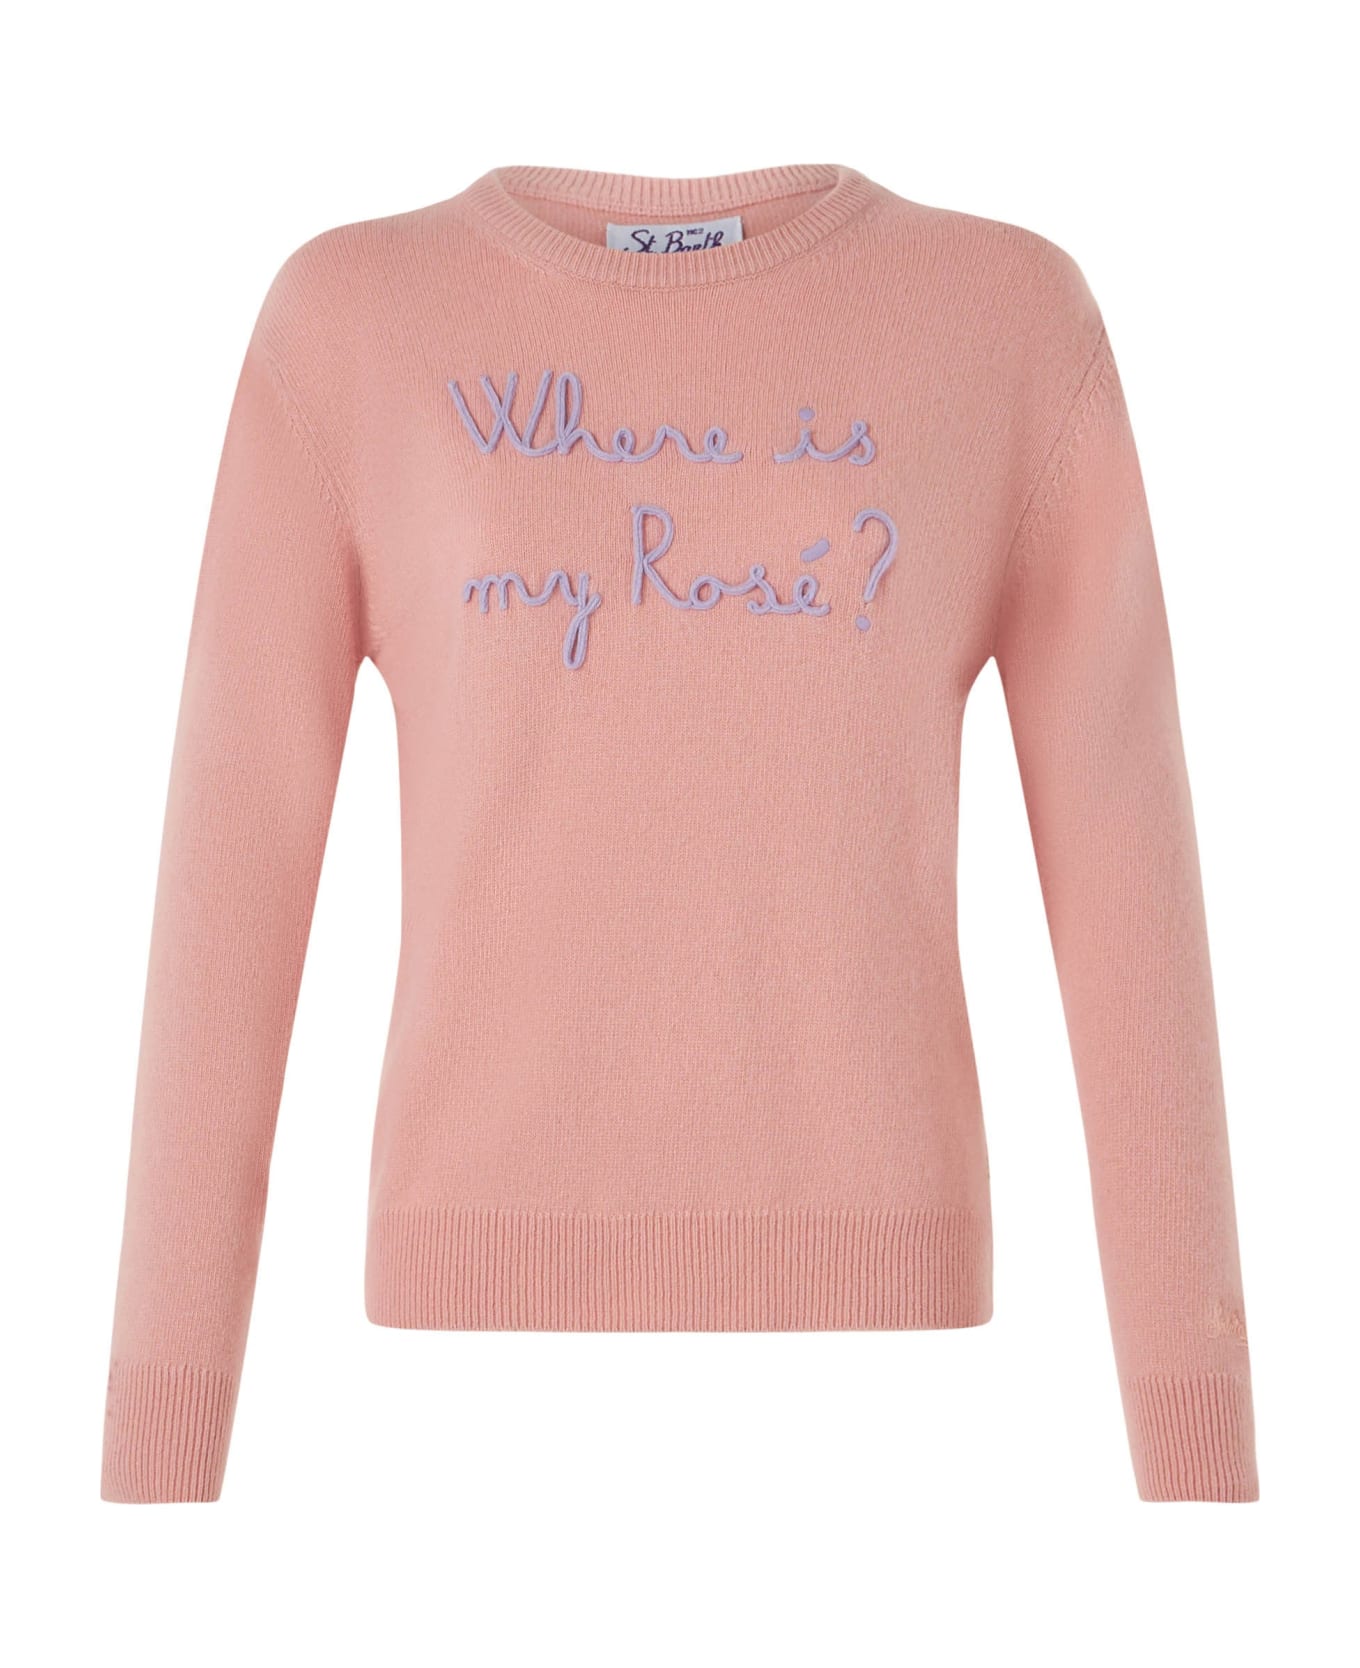 MC2 Saint Barth Woman Sweater With Where Is My Rosé? Embroidery - PINK ニットウェア